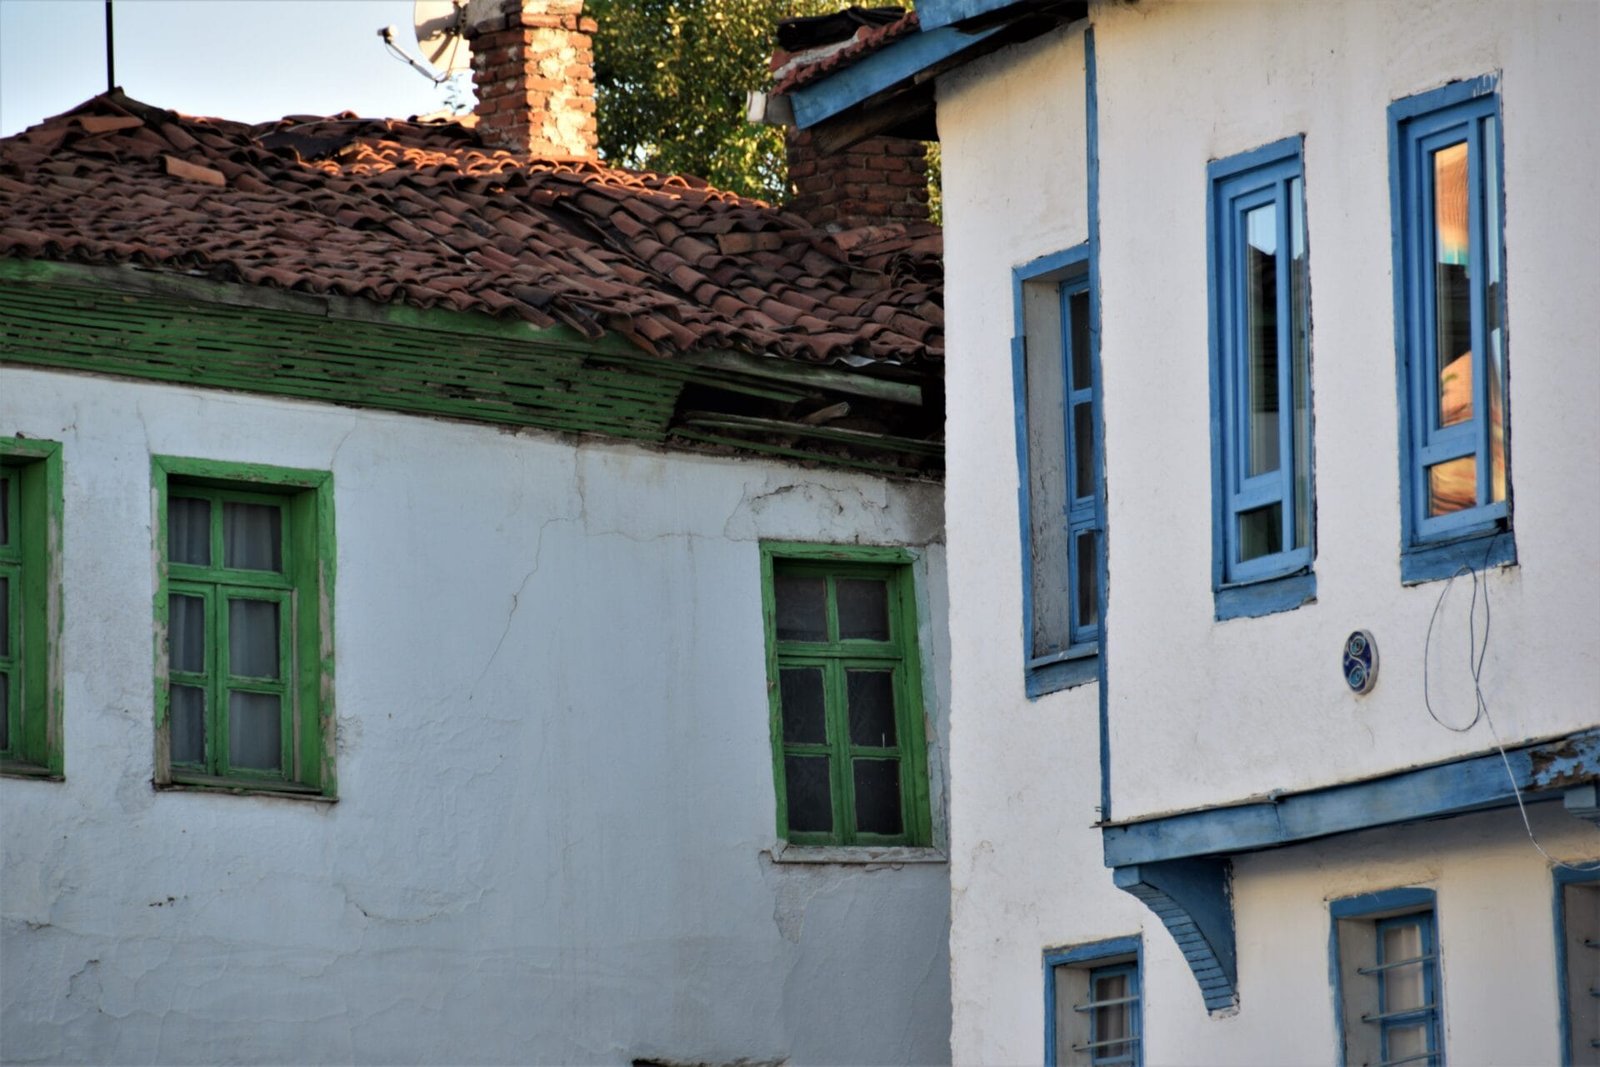 whitewashed Ottoman houses with blue and green framed windows